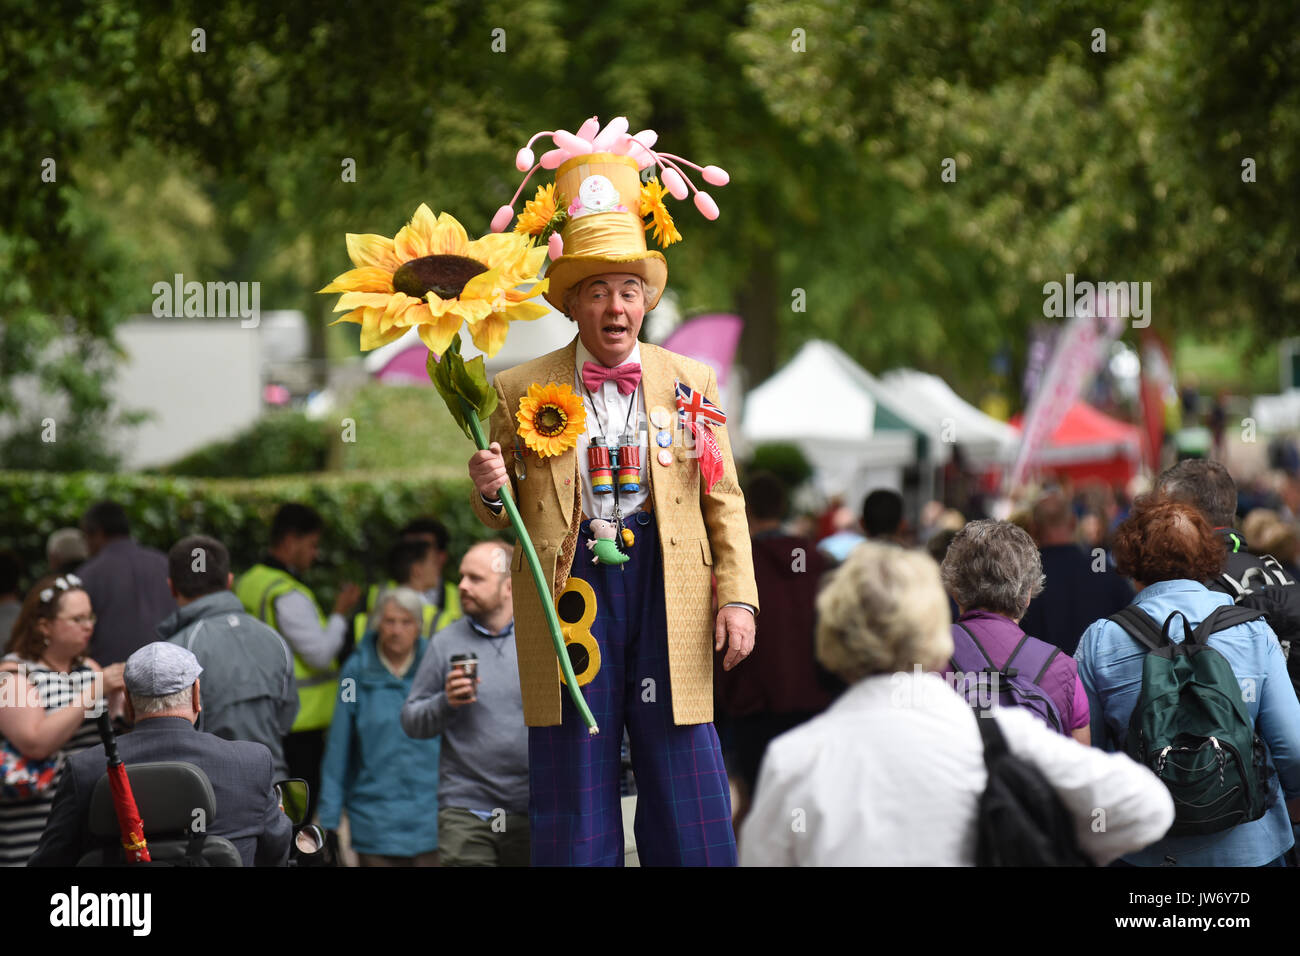 Shropshire, UK. 11th August, 2017. A floral welcome from Professor Crump alias Paul Goddard at the annual Shrewsbury Flower Show in Shropshire. The two day event is open today and Saturday. Credit: David Bagnall/Alamy Live News Stock Photo